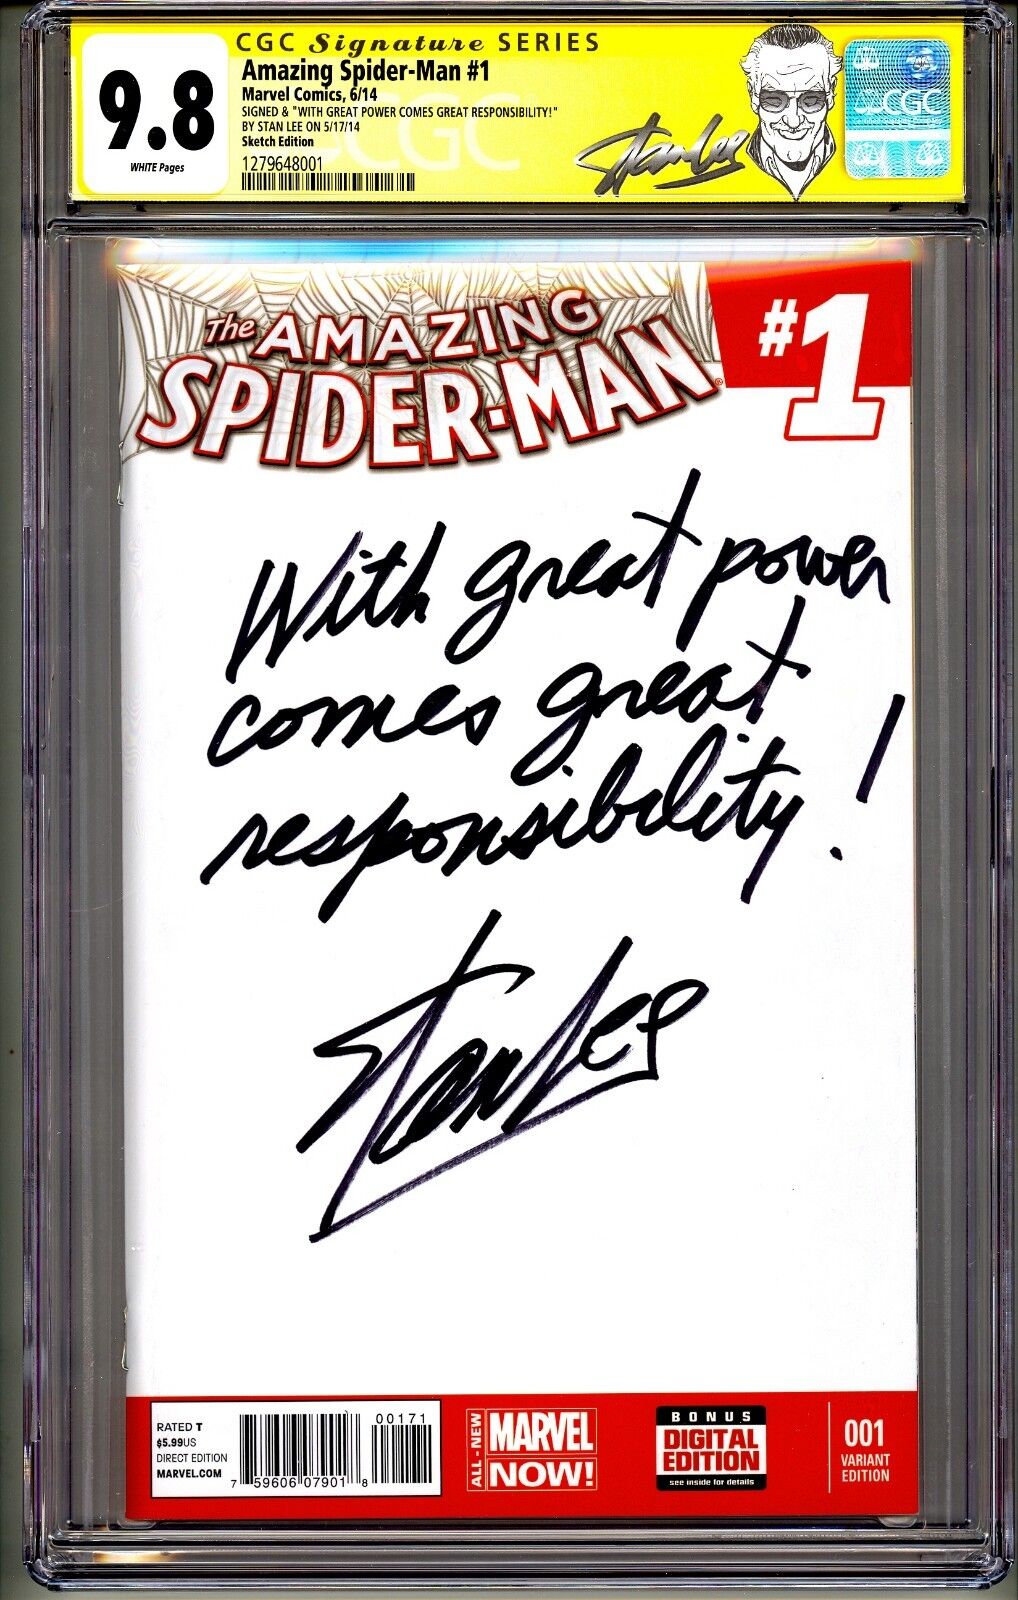 💥AMAZING SPIDER-MAN #1 CGC SS 9.8 STAN LEE QUOTE COMMENT WITH GREAT POWER COMES